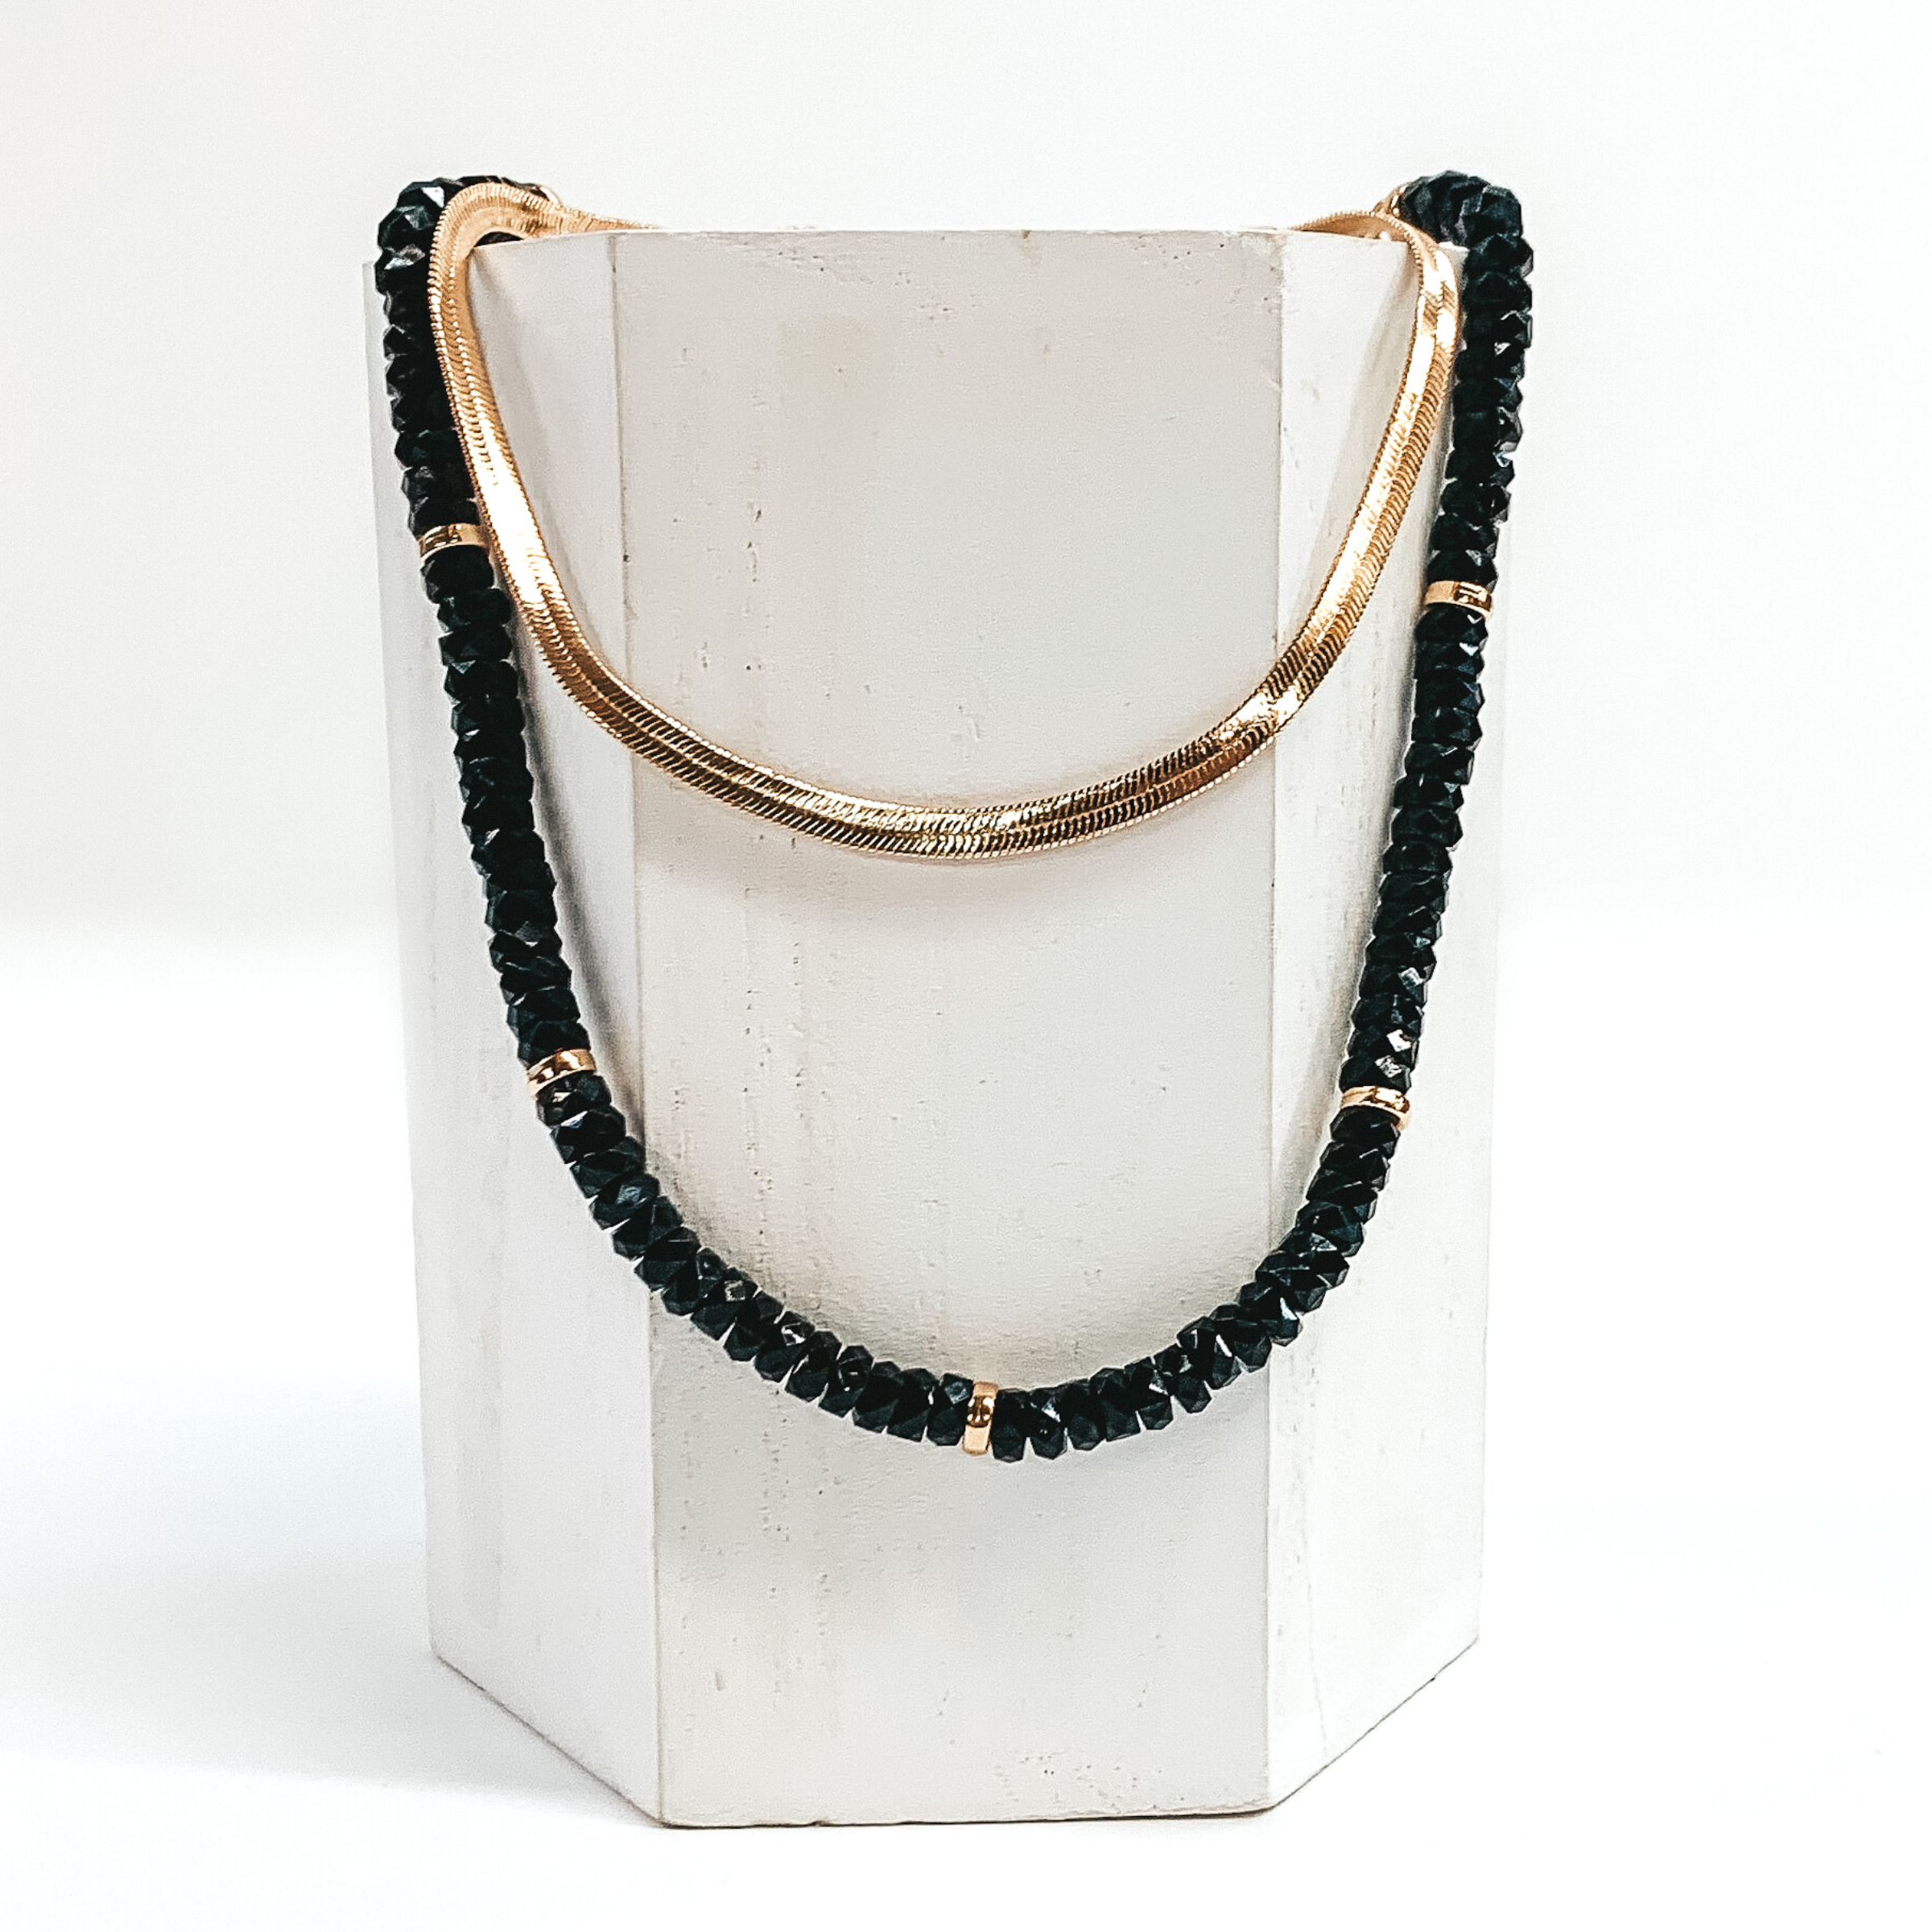 This necklace has a shorter gold snake chain and a longer black beaded necklace with gold bead spacers. This necklace is laid on a piece of white wood that is pictured on a white background.